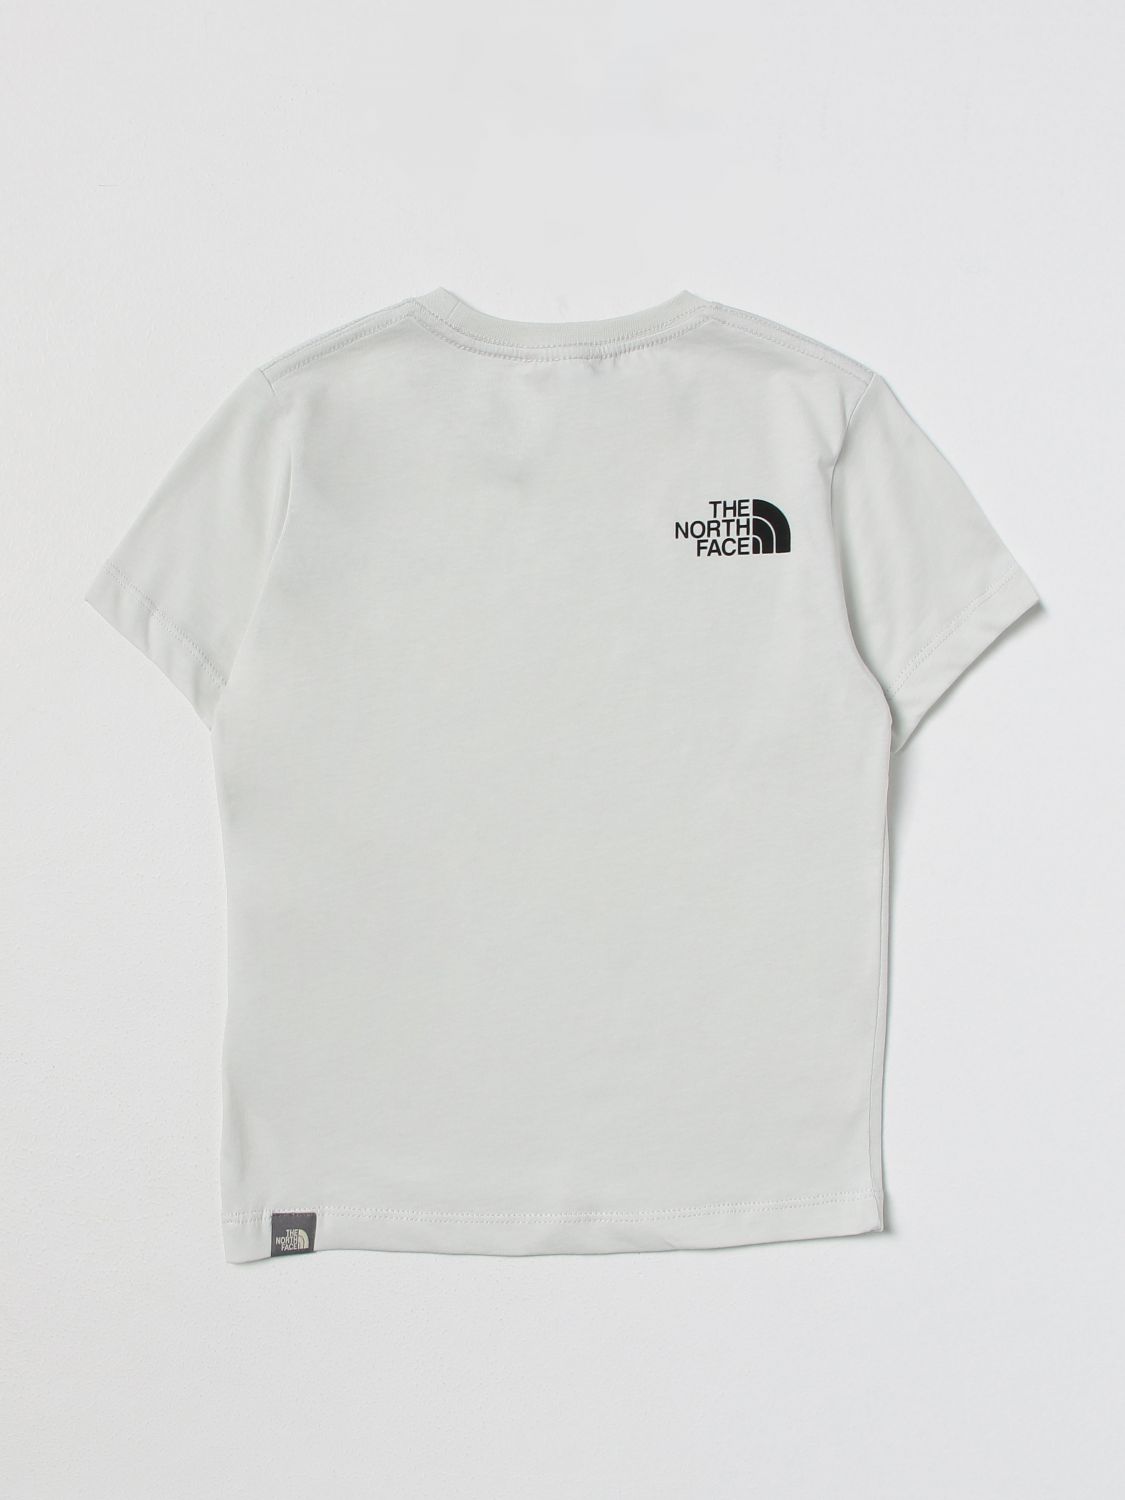 THE NORTH FACE: t-shirt for boys - White 1 | The North Face t-shirt online on GIGLIO.COM